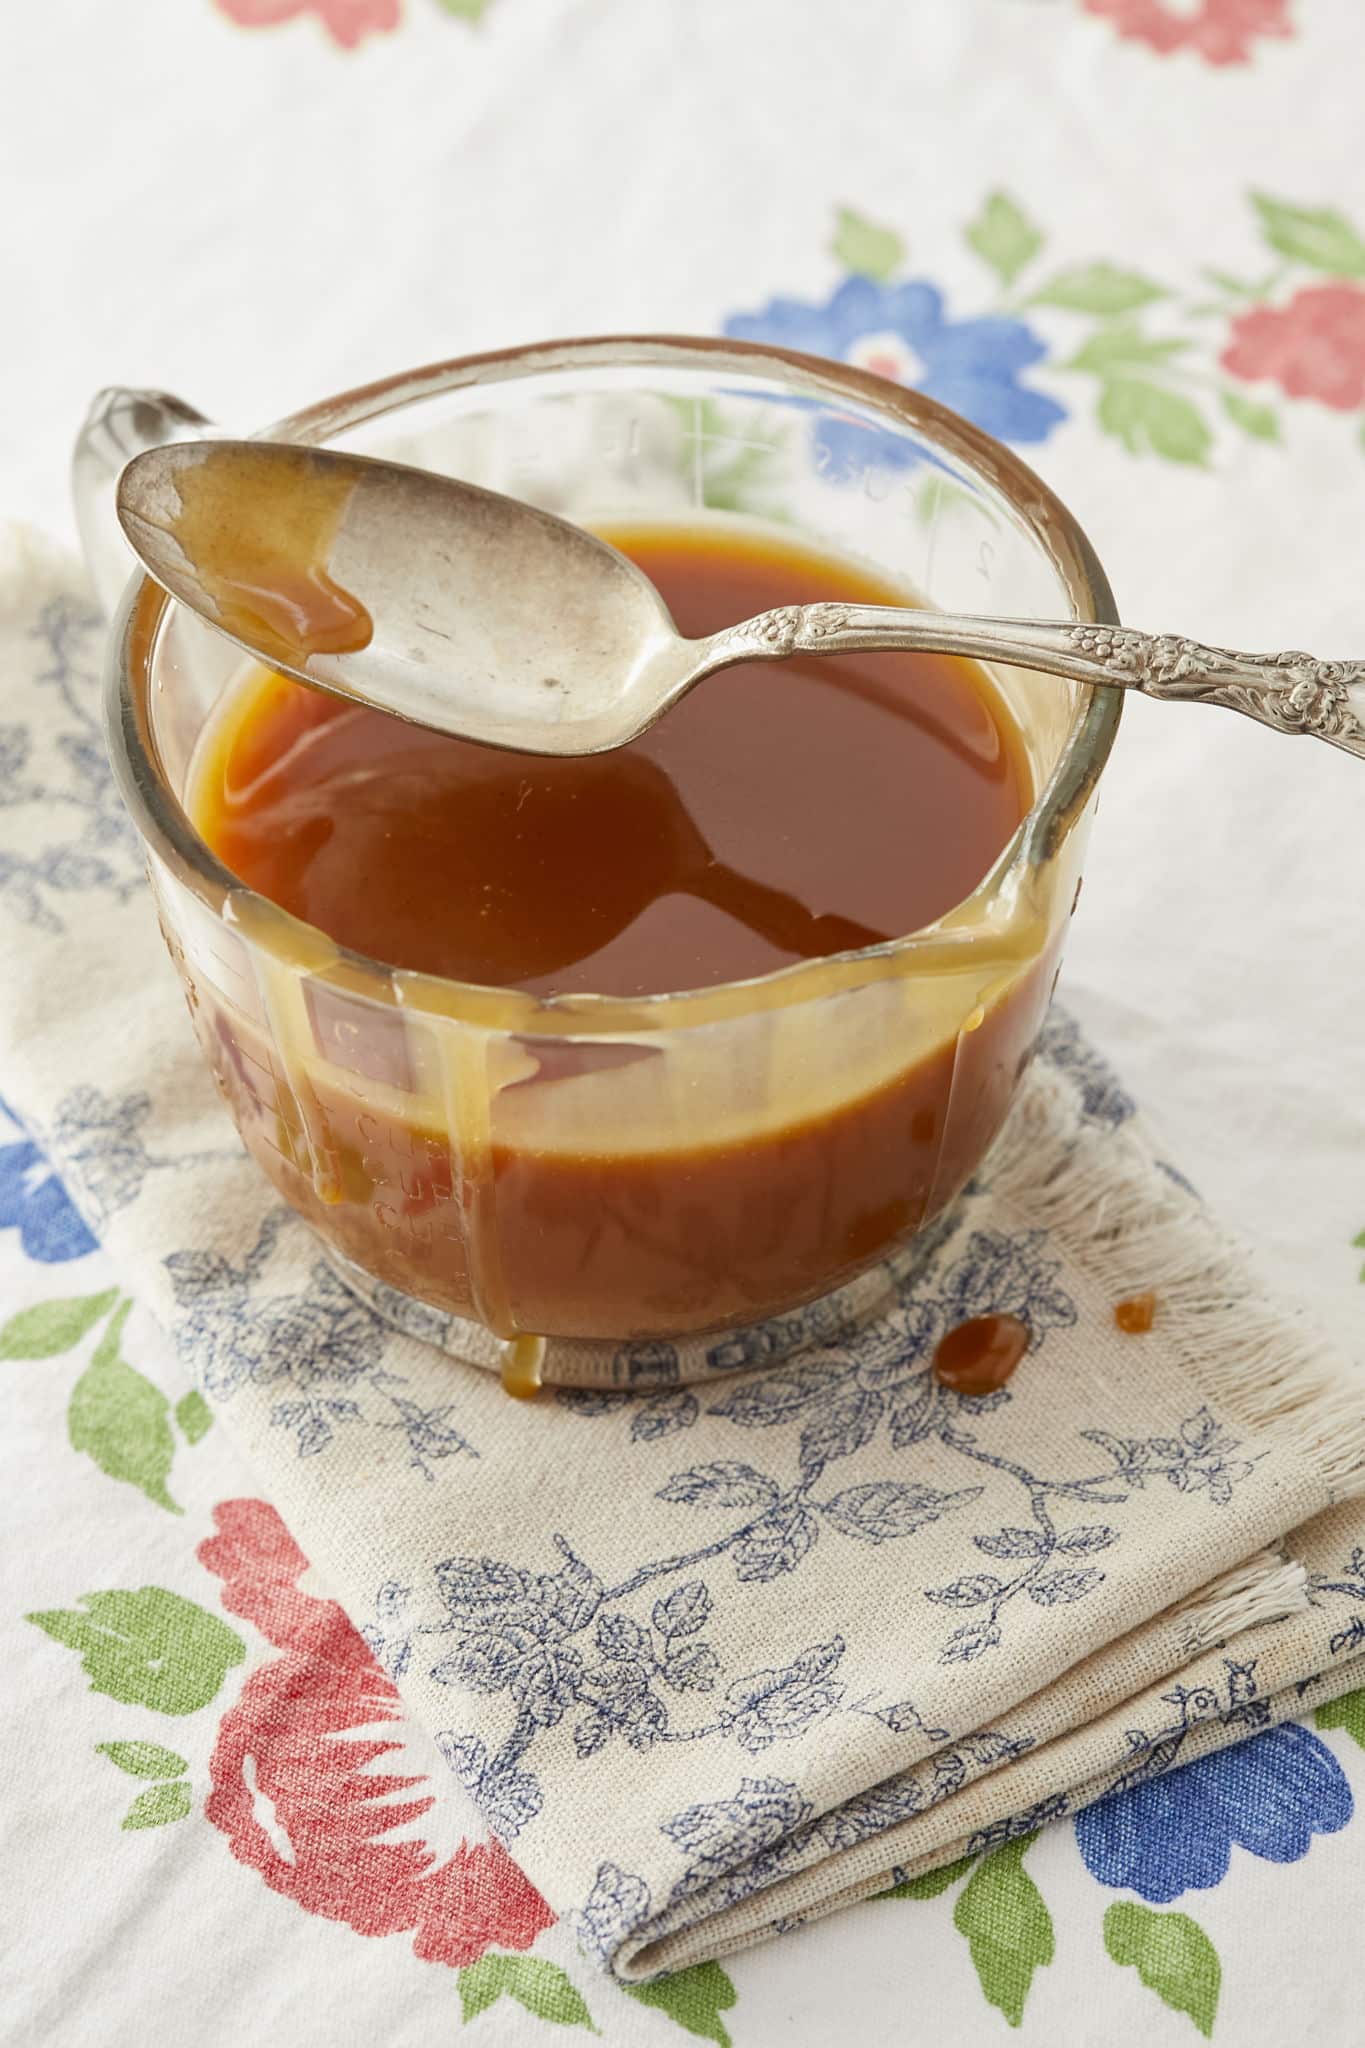 A glass jar full of apple cider caramel sauce, with a spoon laid on the edge, on a linen napkin and tablecloth